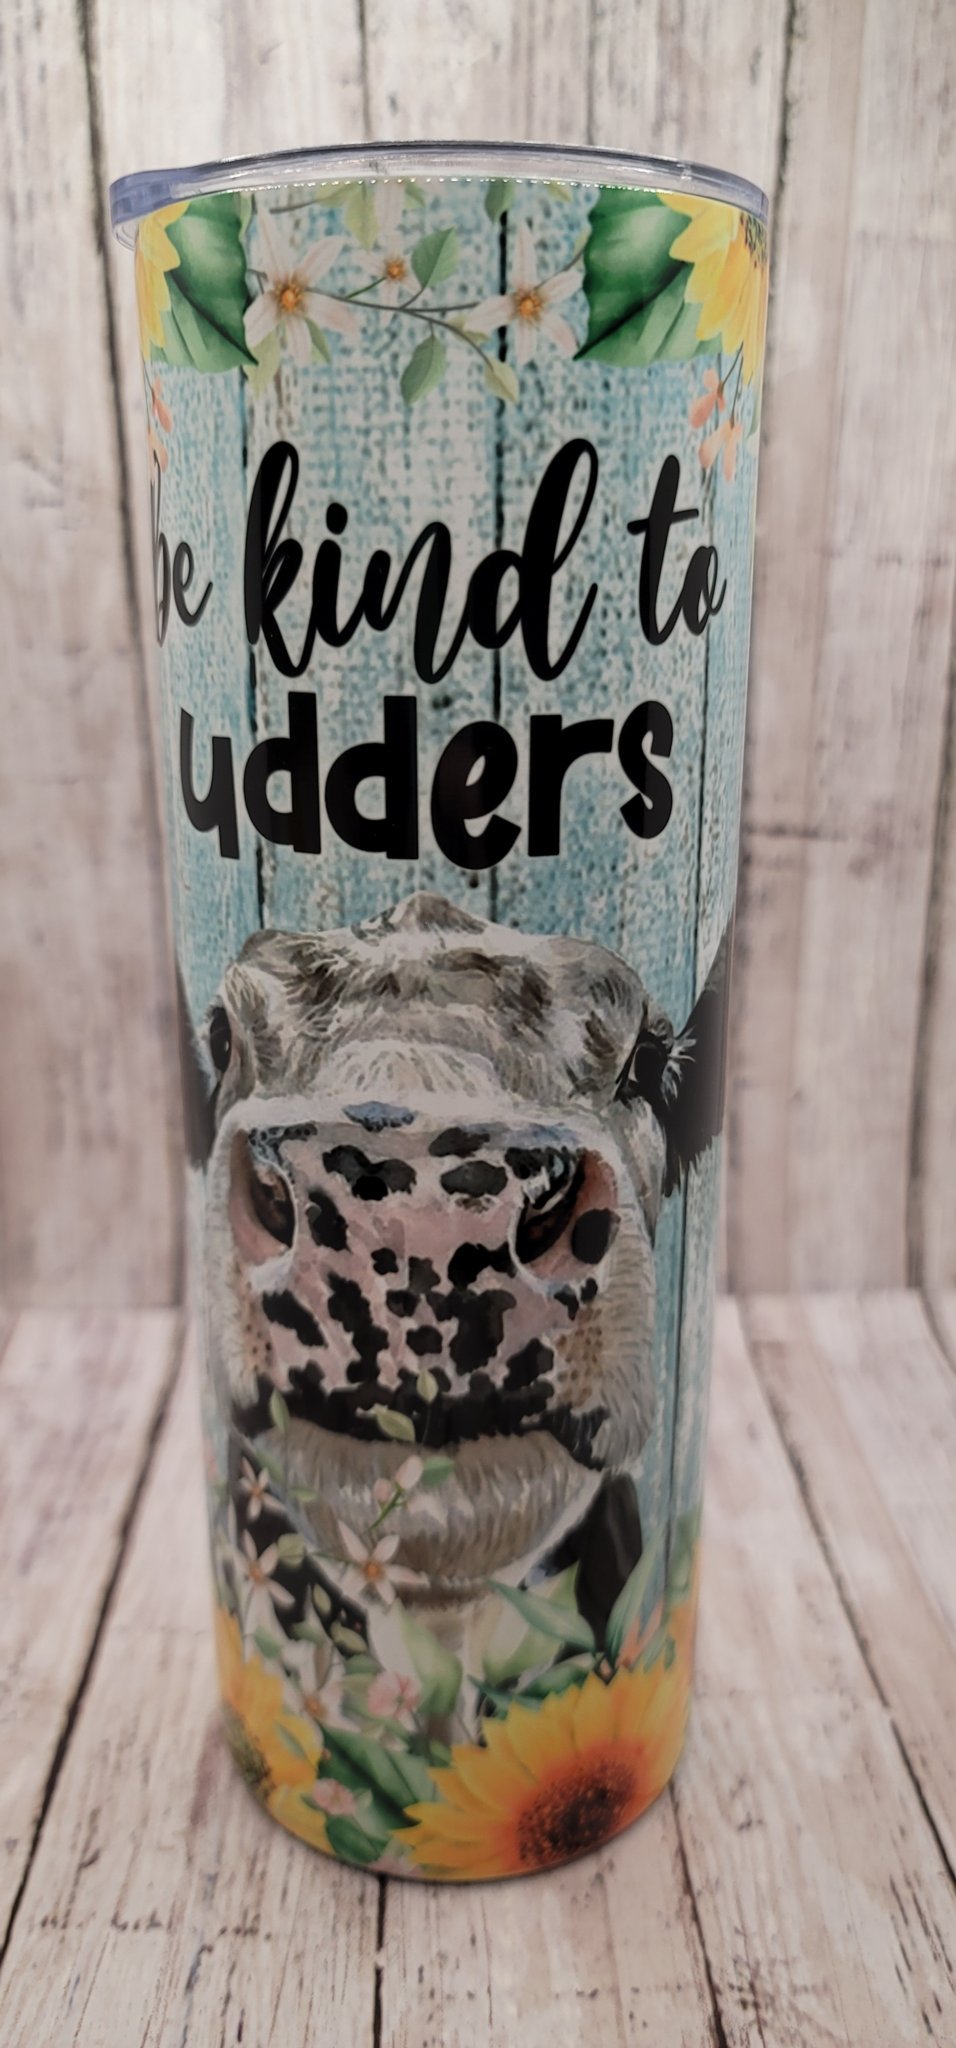 Be kind to Udders